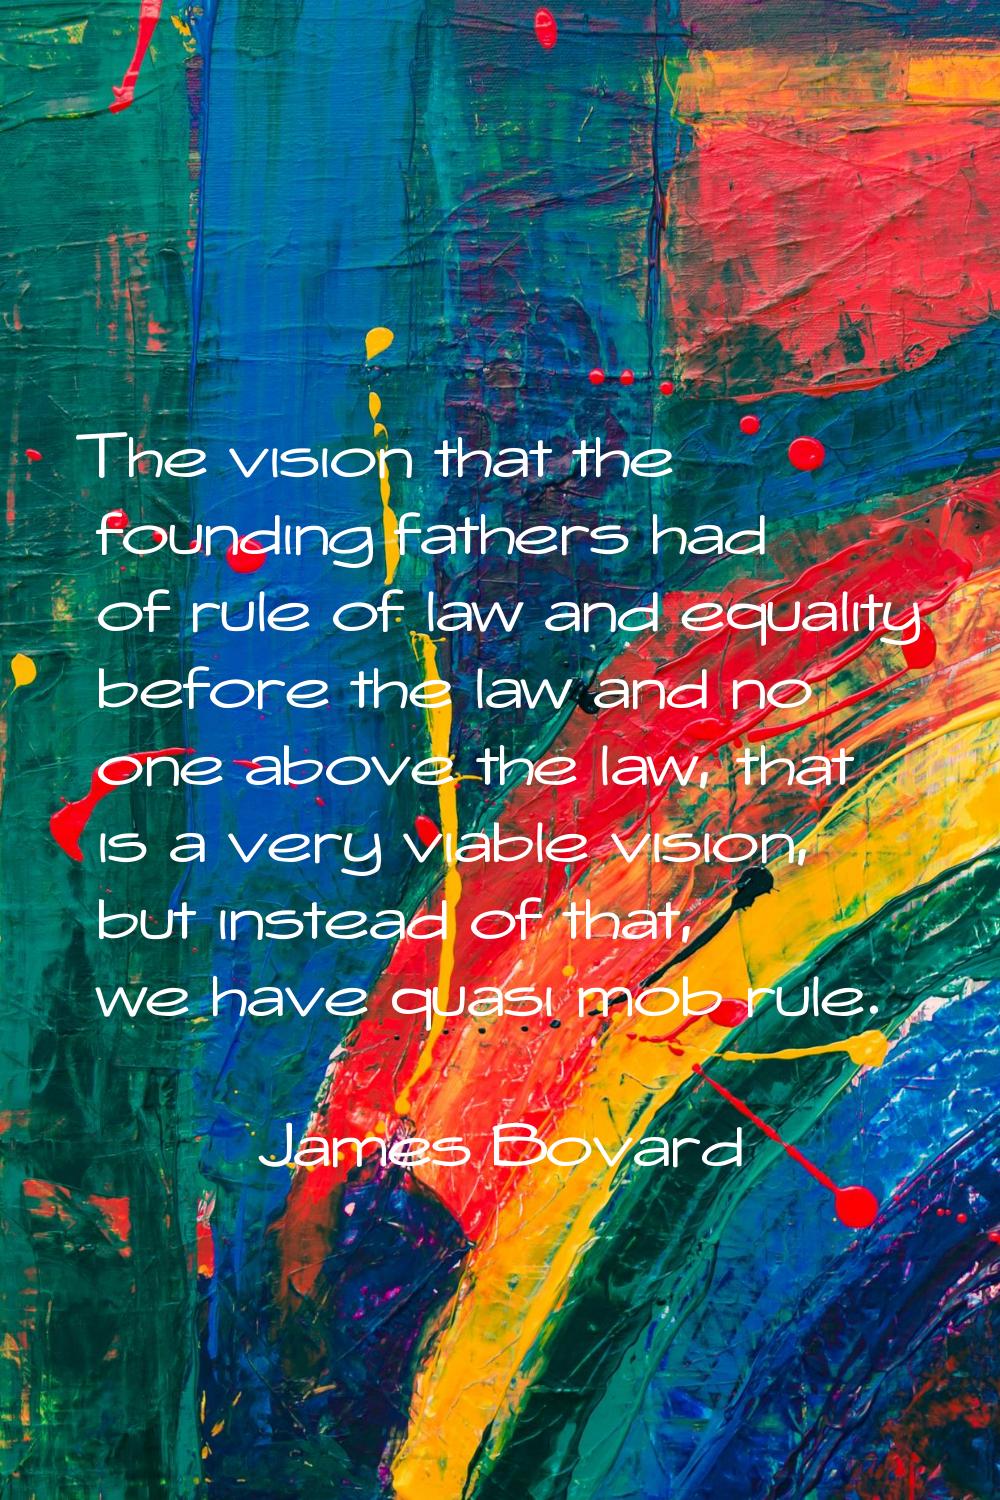 The vision that the founding fathers had of rule of law and equality before the law and no one abov